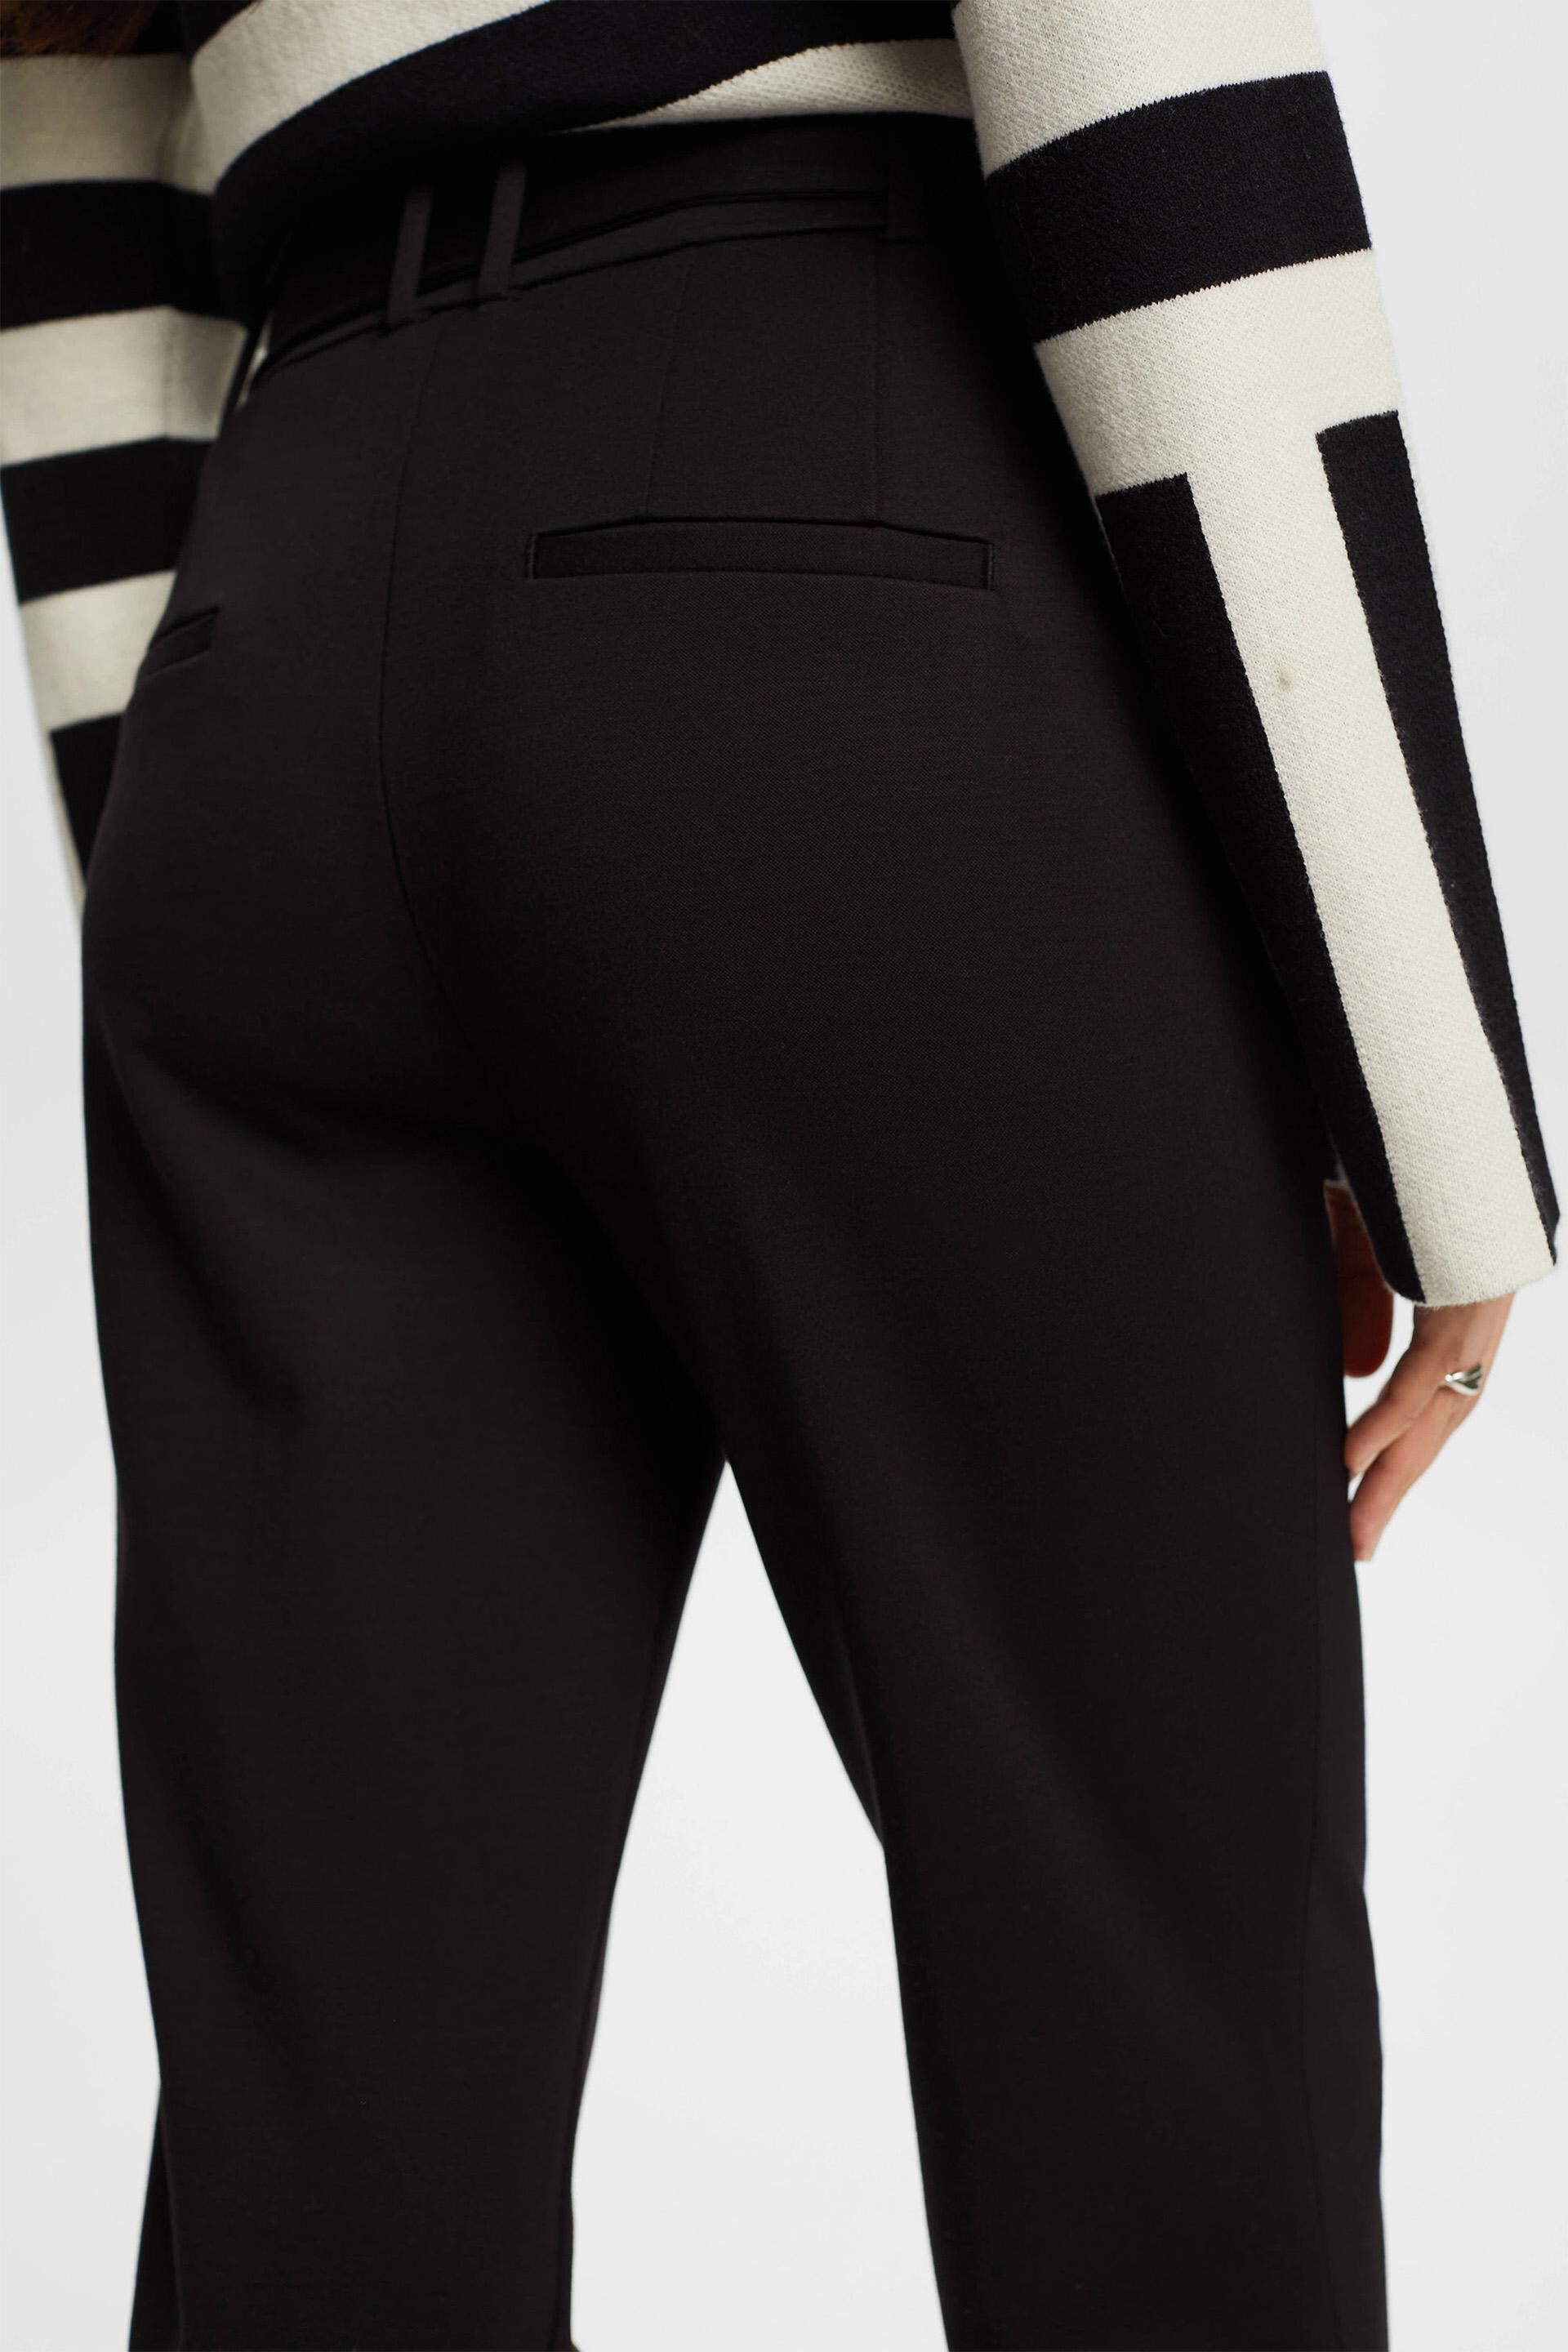 Straight line trousers